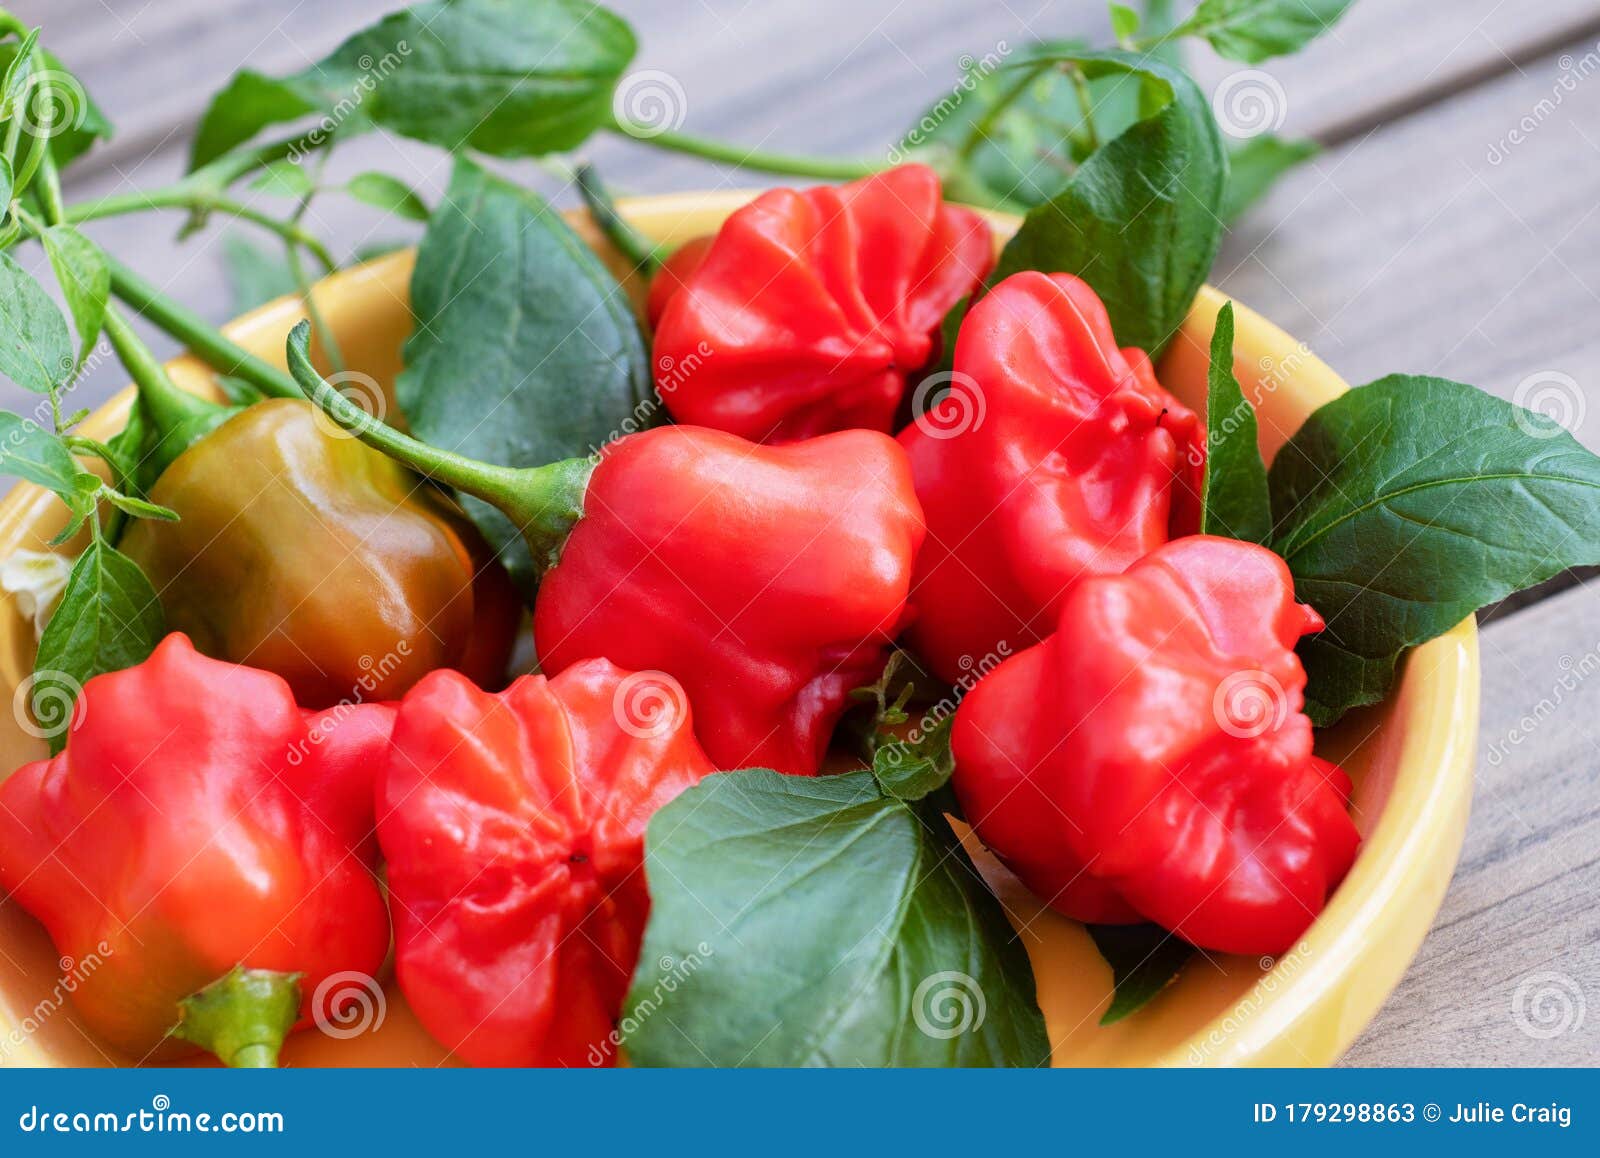 introducing the mat hatter! peppers that will make you smile.